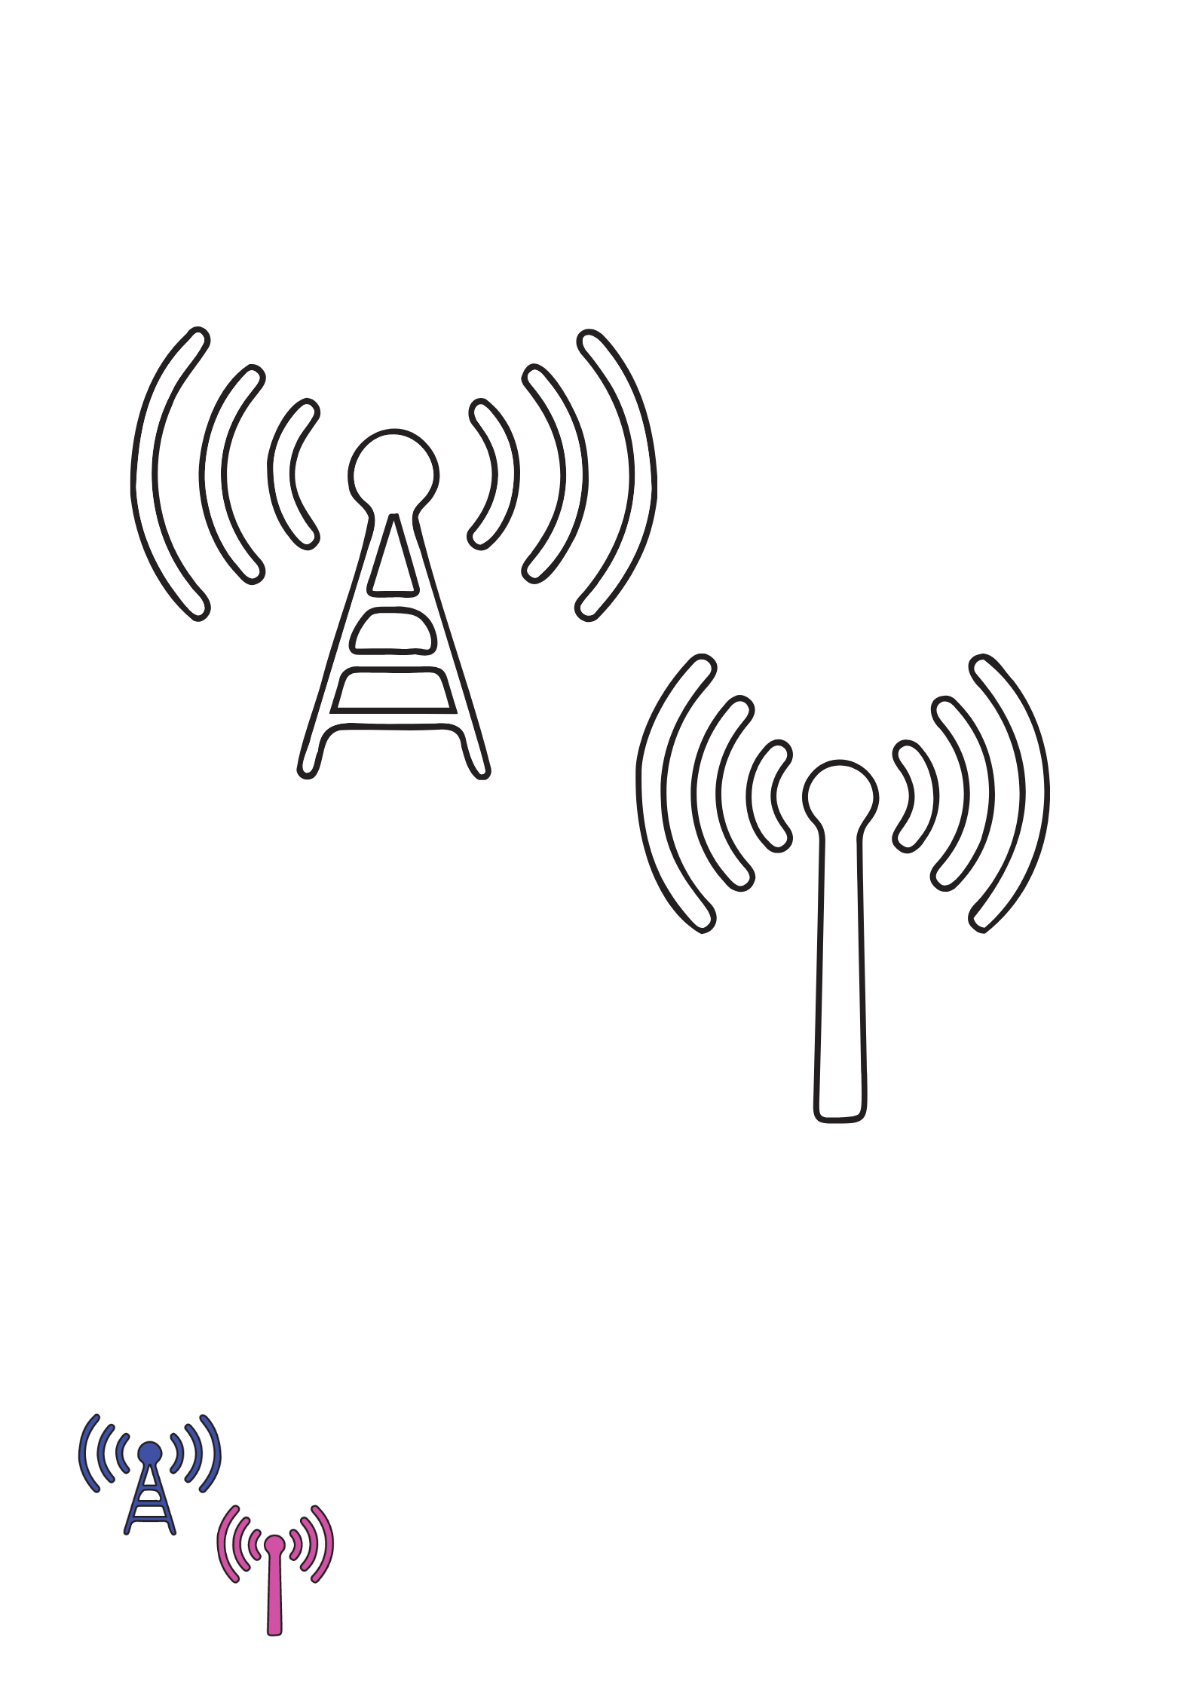 Wifi Tower coloring page